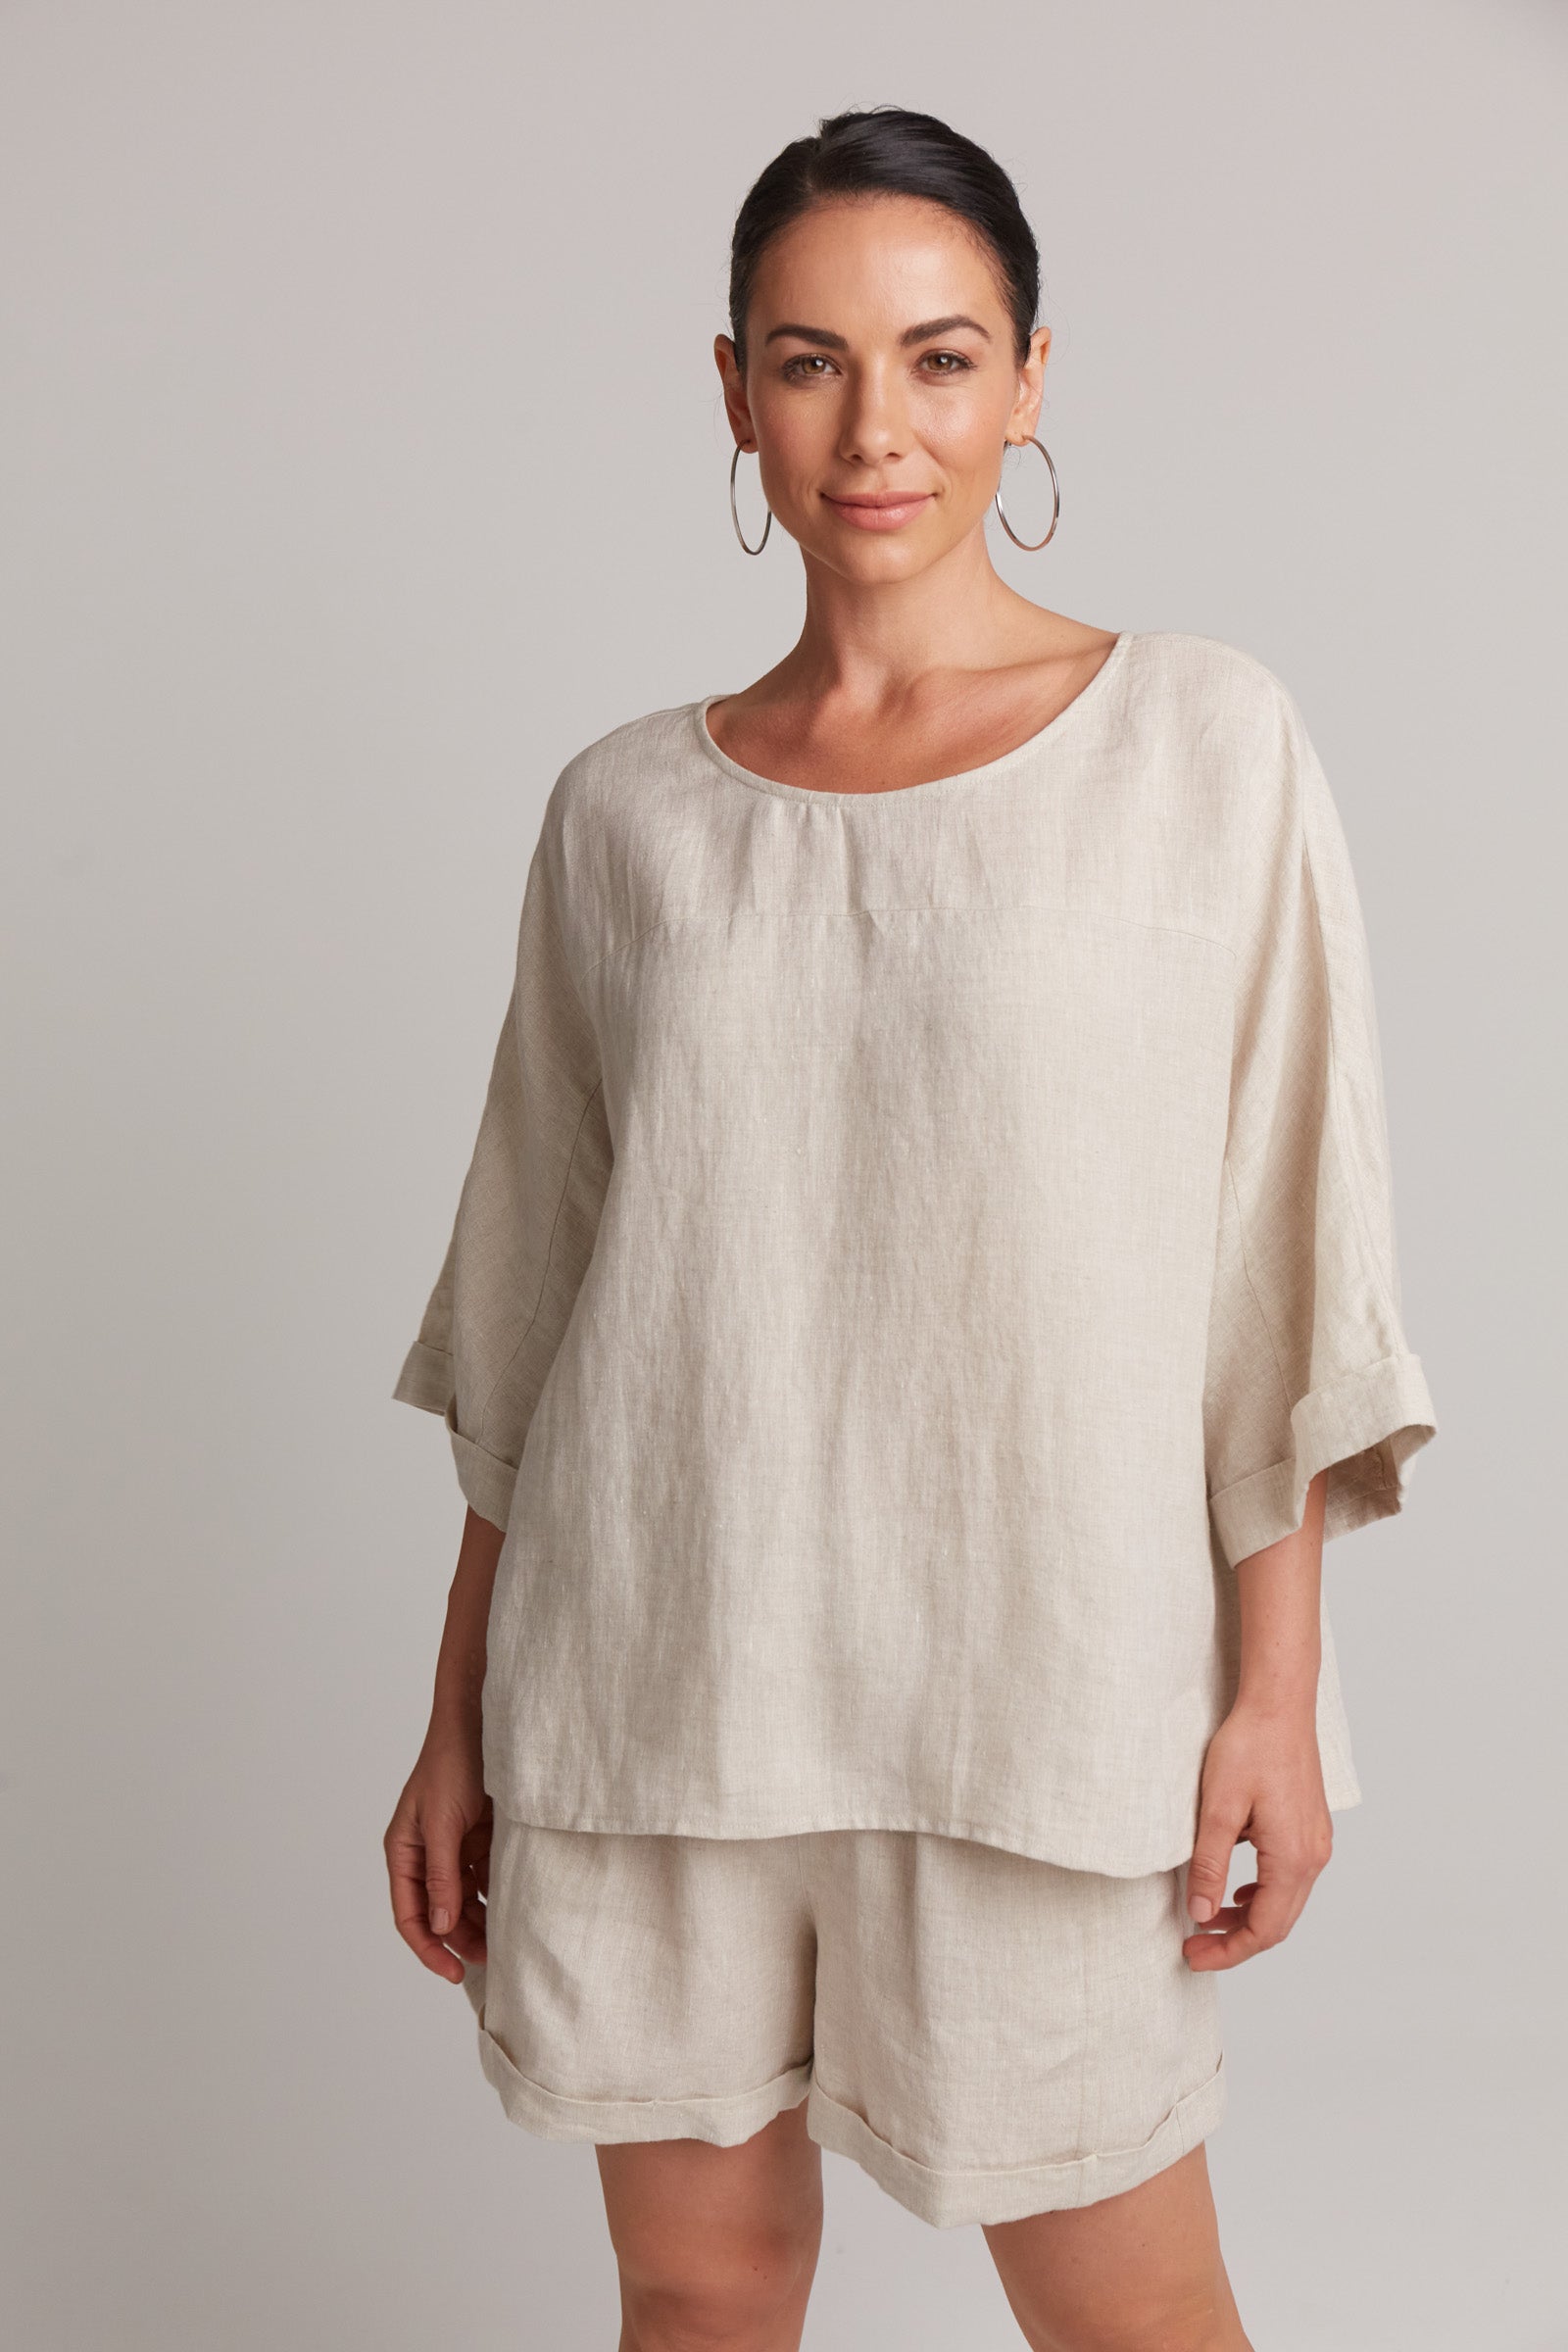 Studio Relaxed Top - Tusk - eb&ive Clothing - Top 3/4 Sleeve Linen